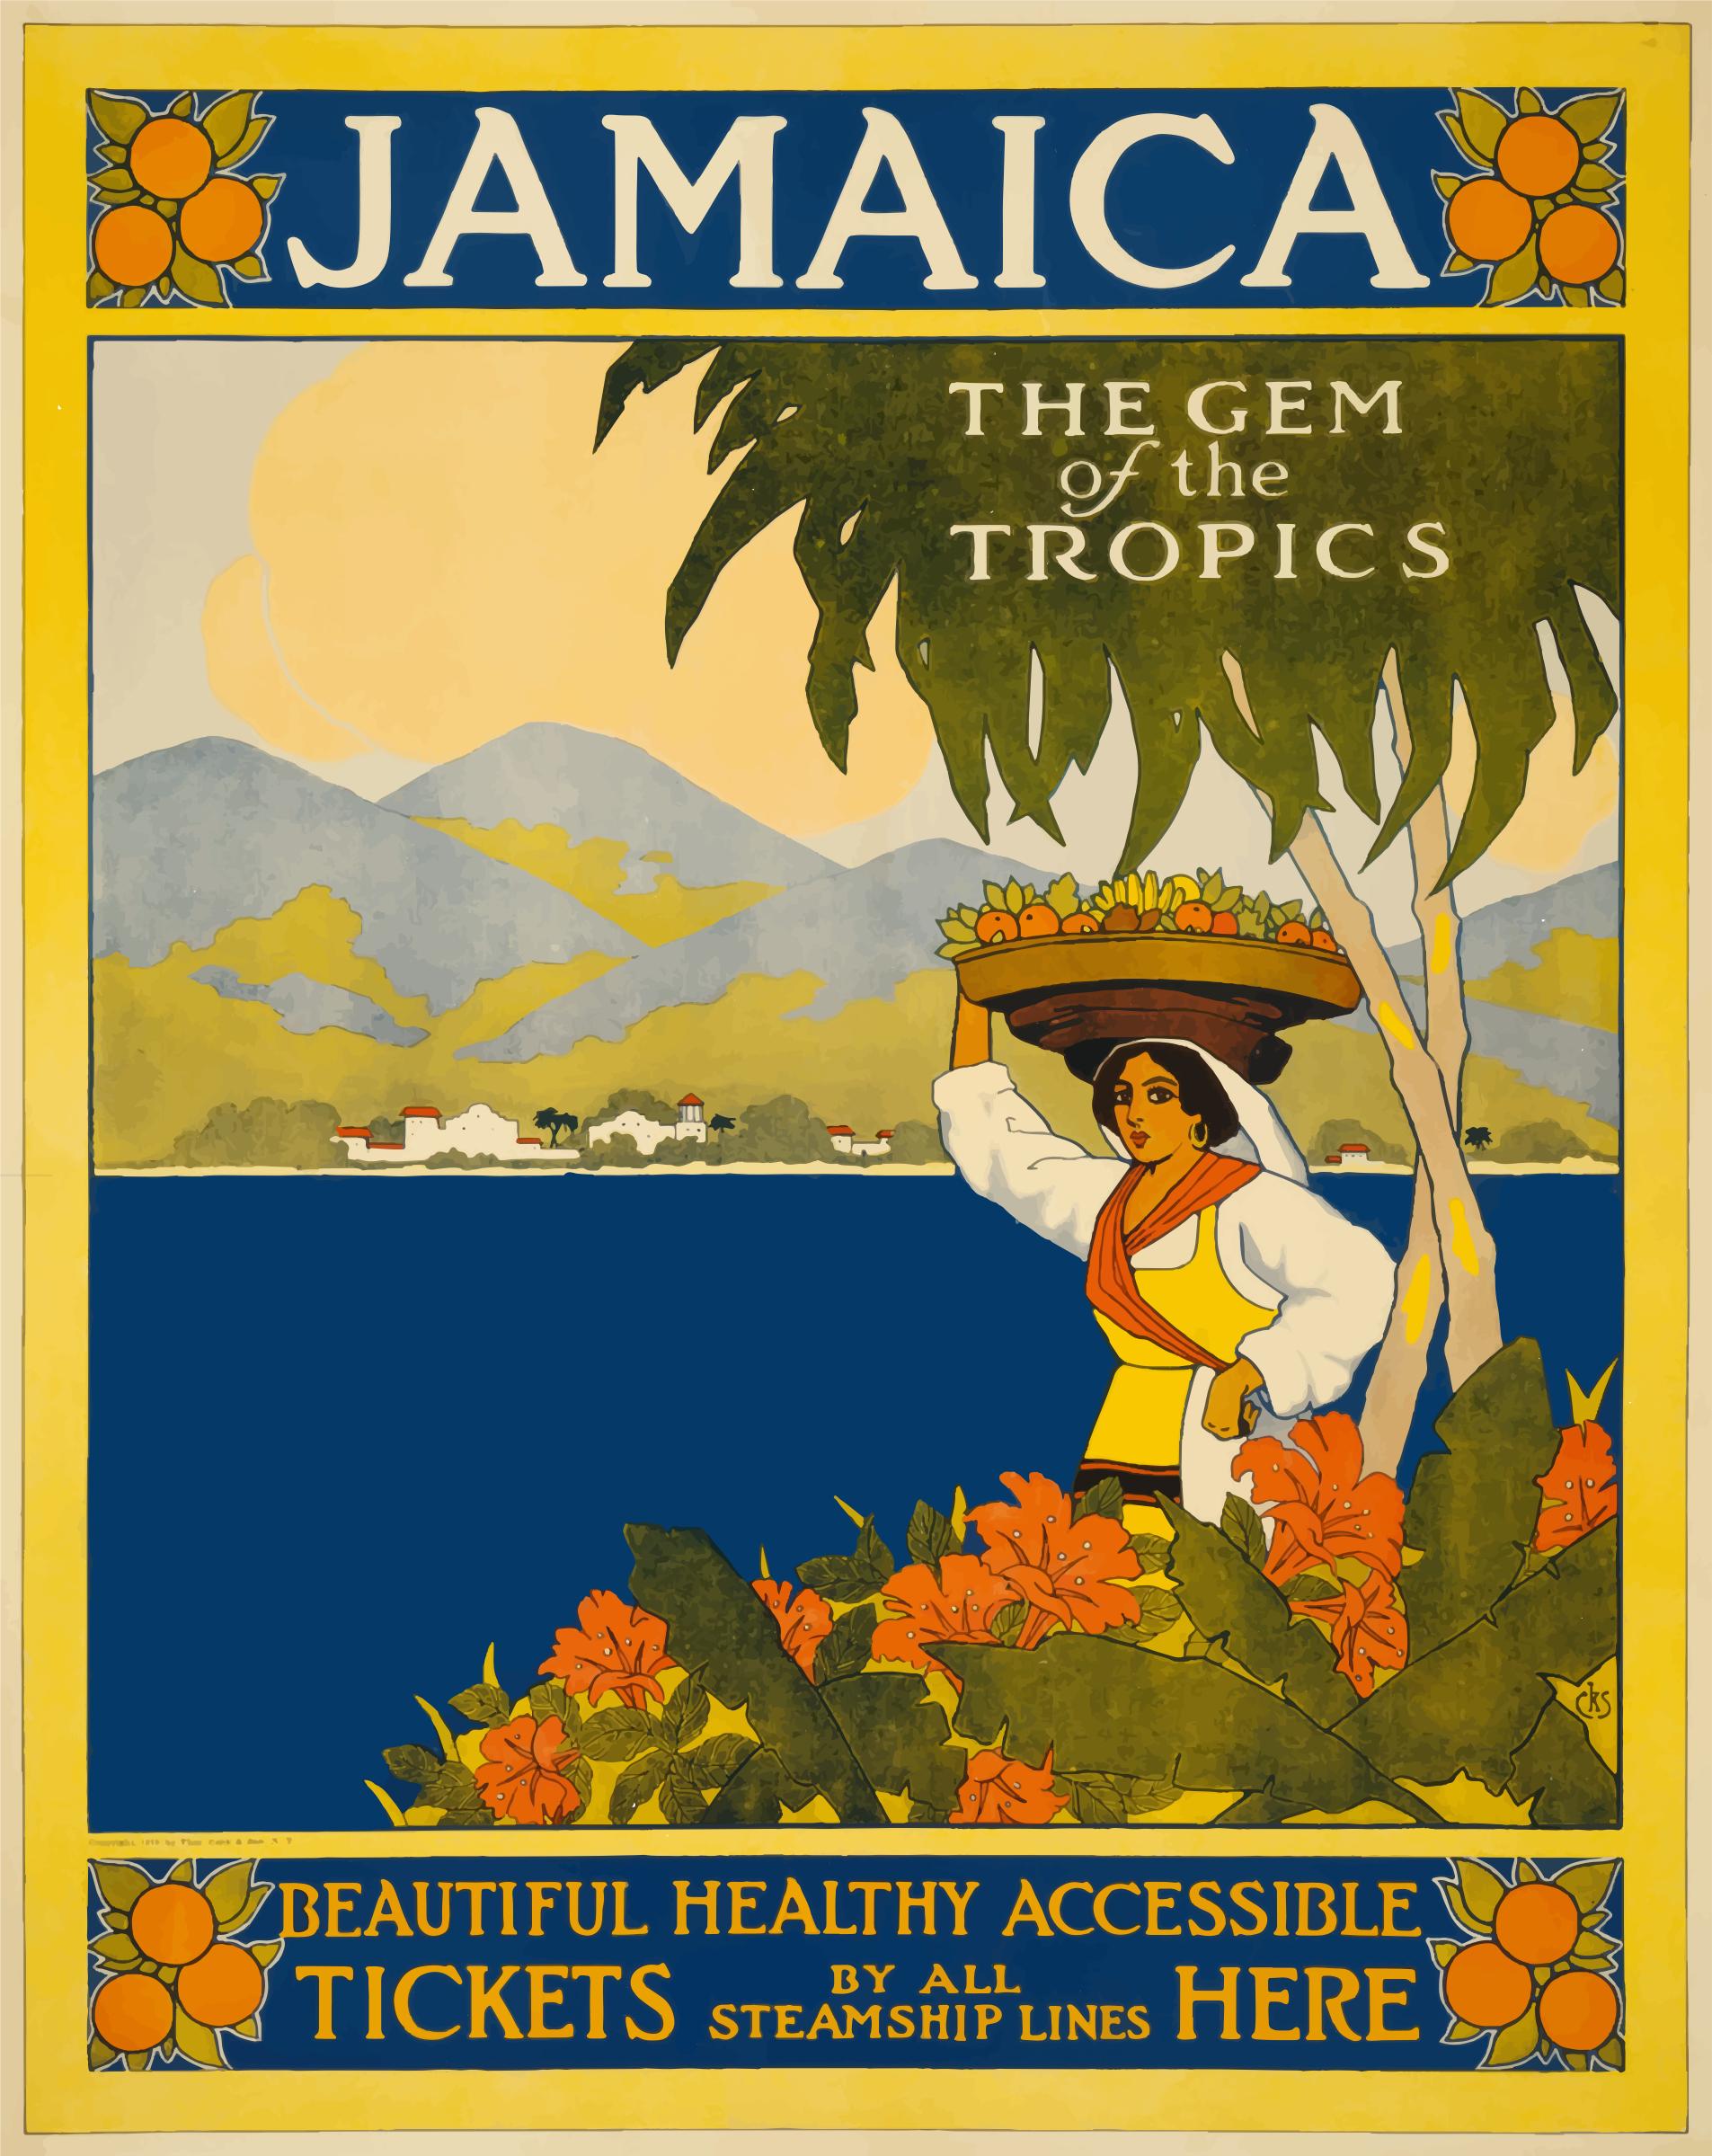 Jamaica The Gem Of The Tropics Vintage Travel Poster 1910 png